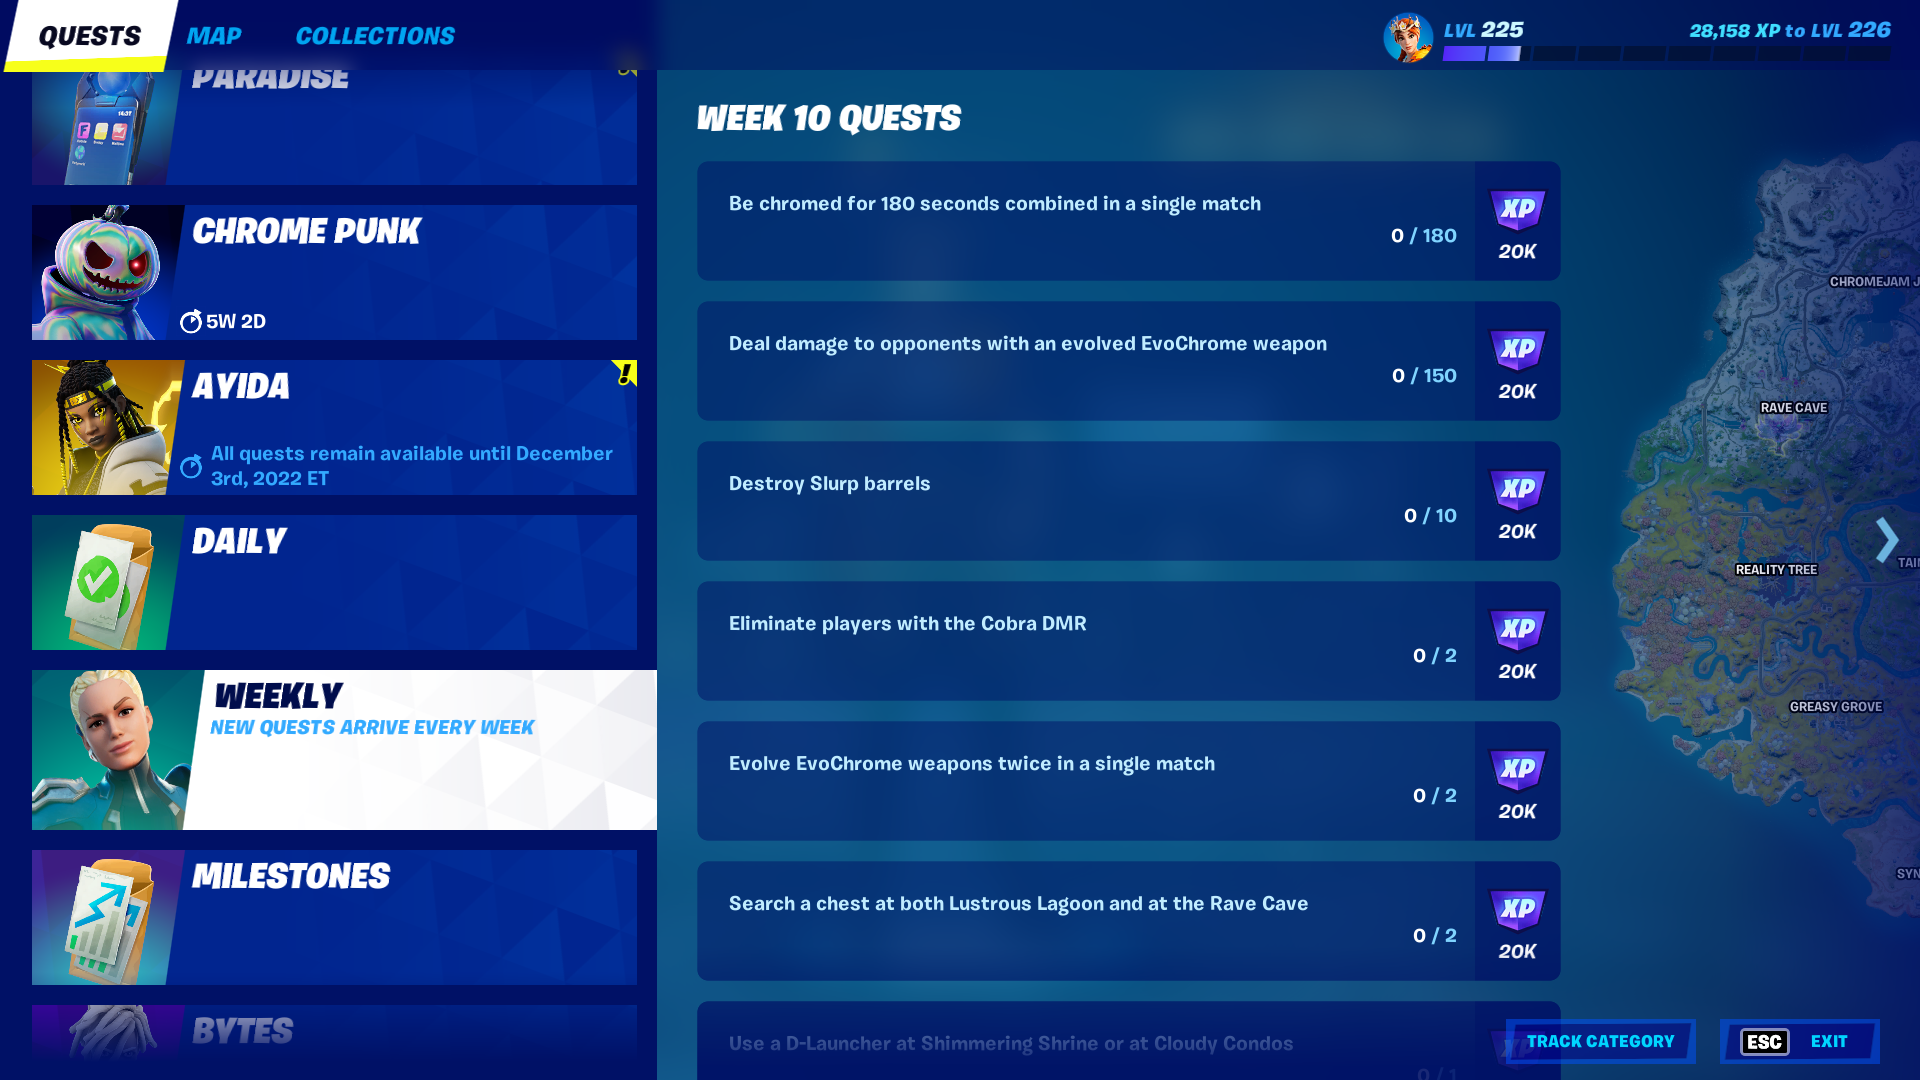 Chapter 3 Season 4: Week 10 Quests available now